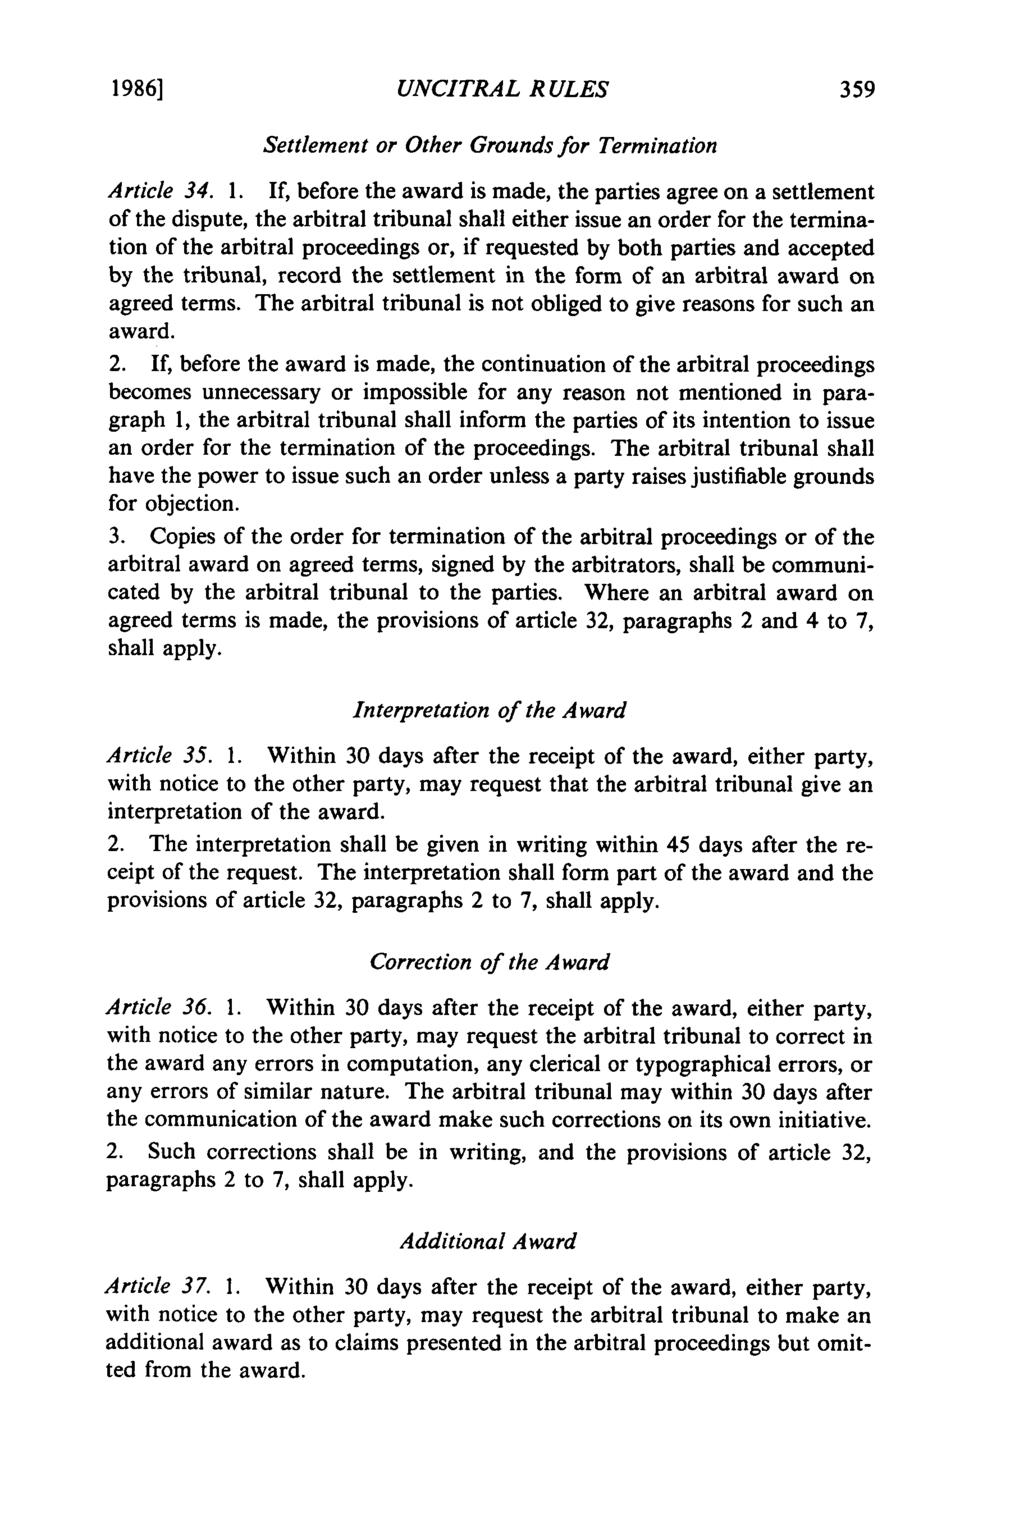 1986] UNCITRAL RULES Settlement or Other Grounds for Termination Article 34. 1.